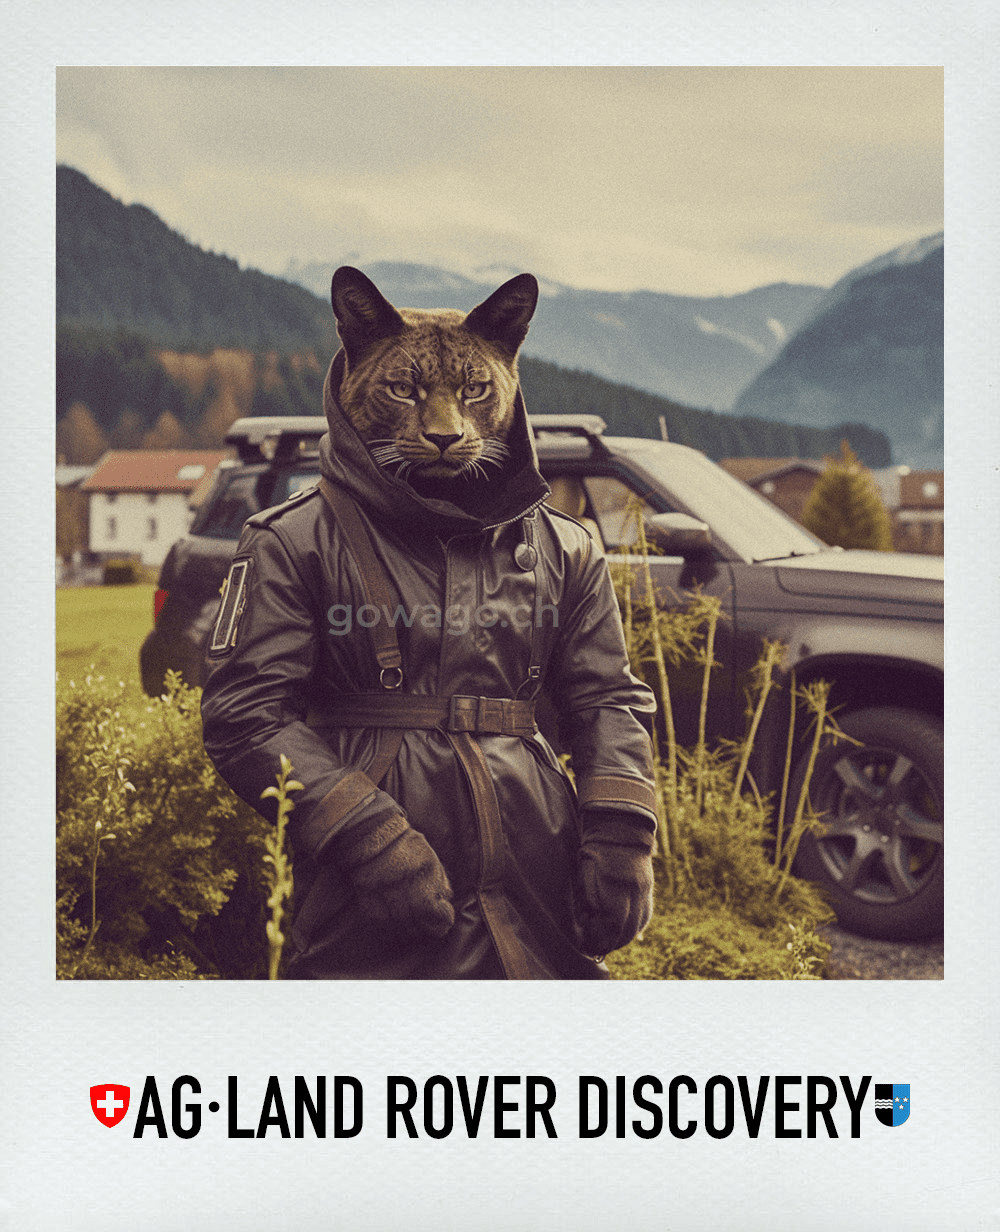 AG - LAND ROVER DISCOVERY